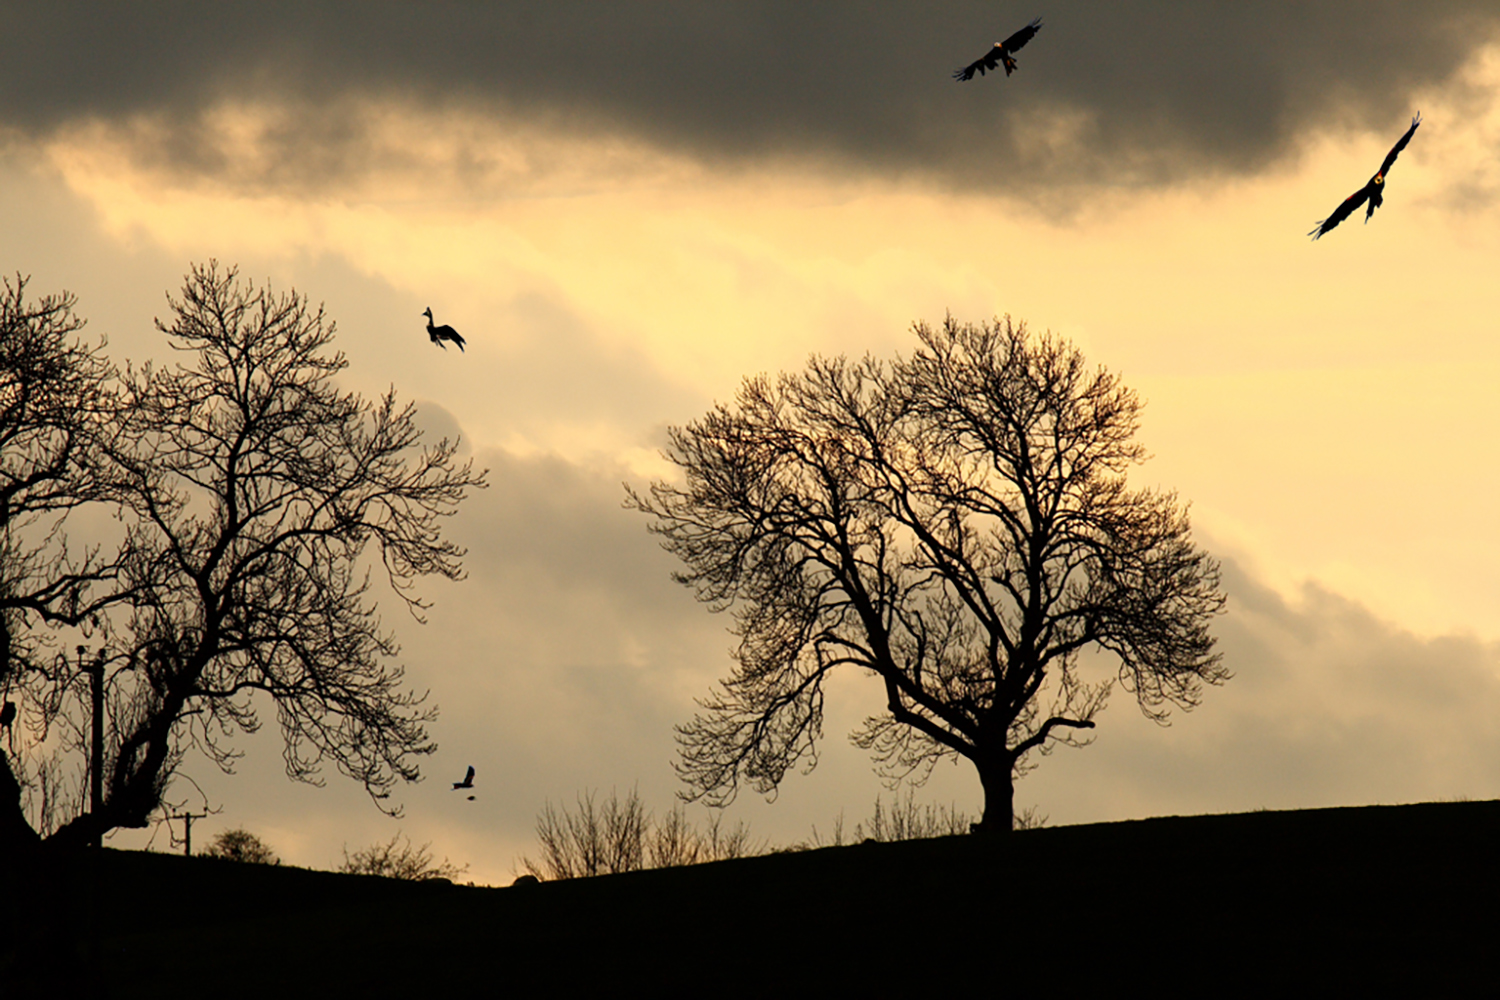 Red Kites having a last fly-around on a Winters' evening, near Knighton on the Radnor / Hereford borders.